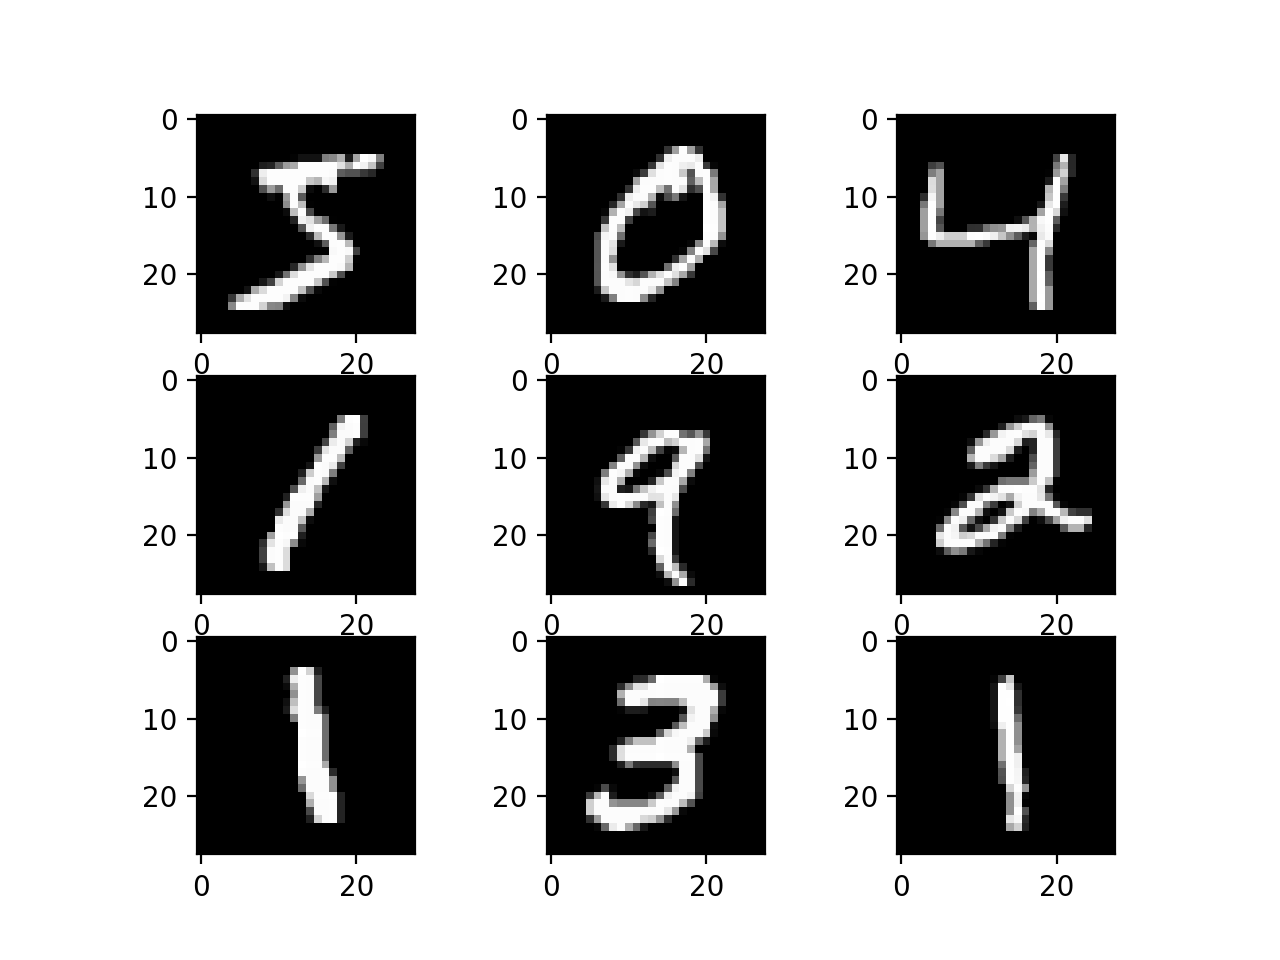 applications/handwritten_digits_classification/mnist_example.png